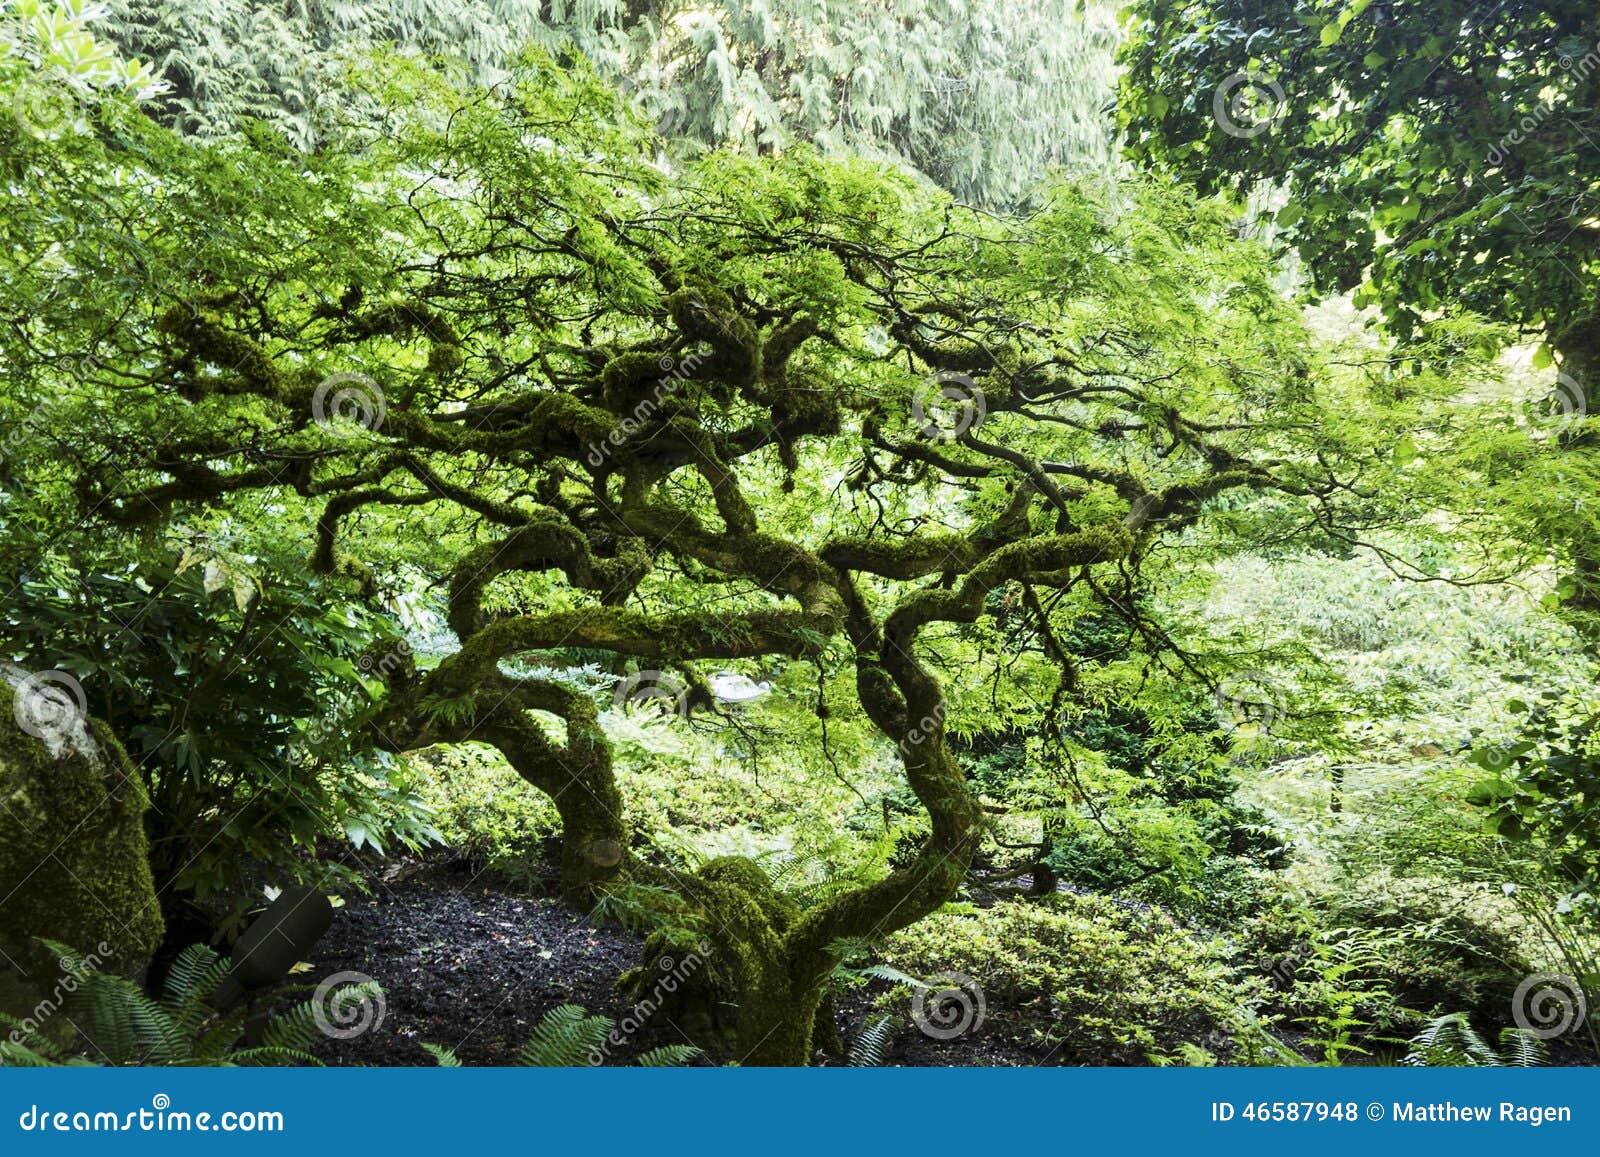 Bonsai Tree With Twisted Branches Stock Photo - Image: 46587948